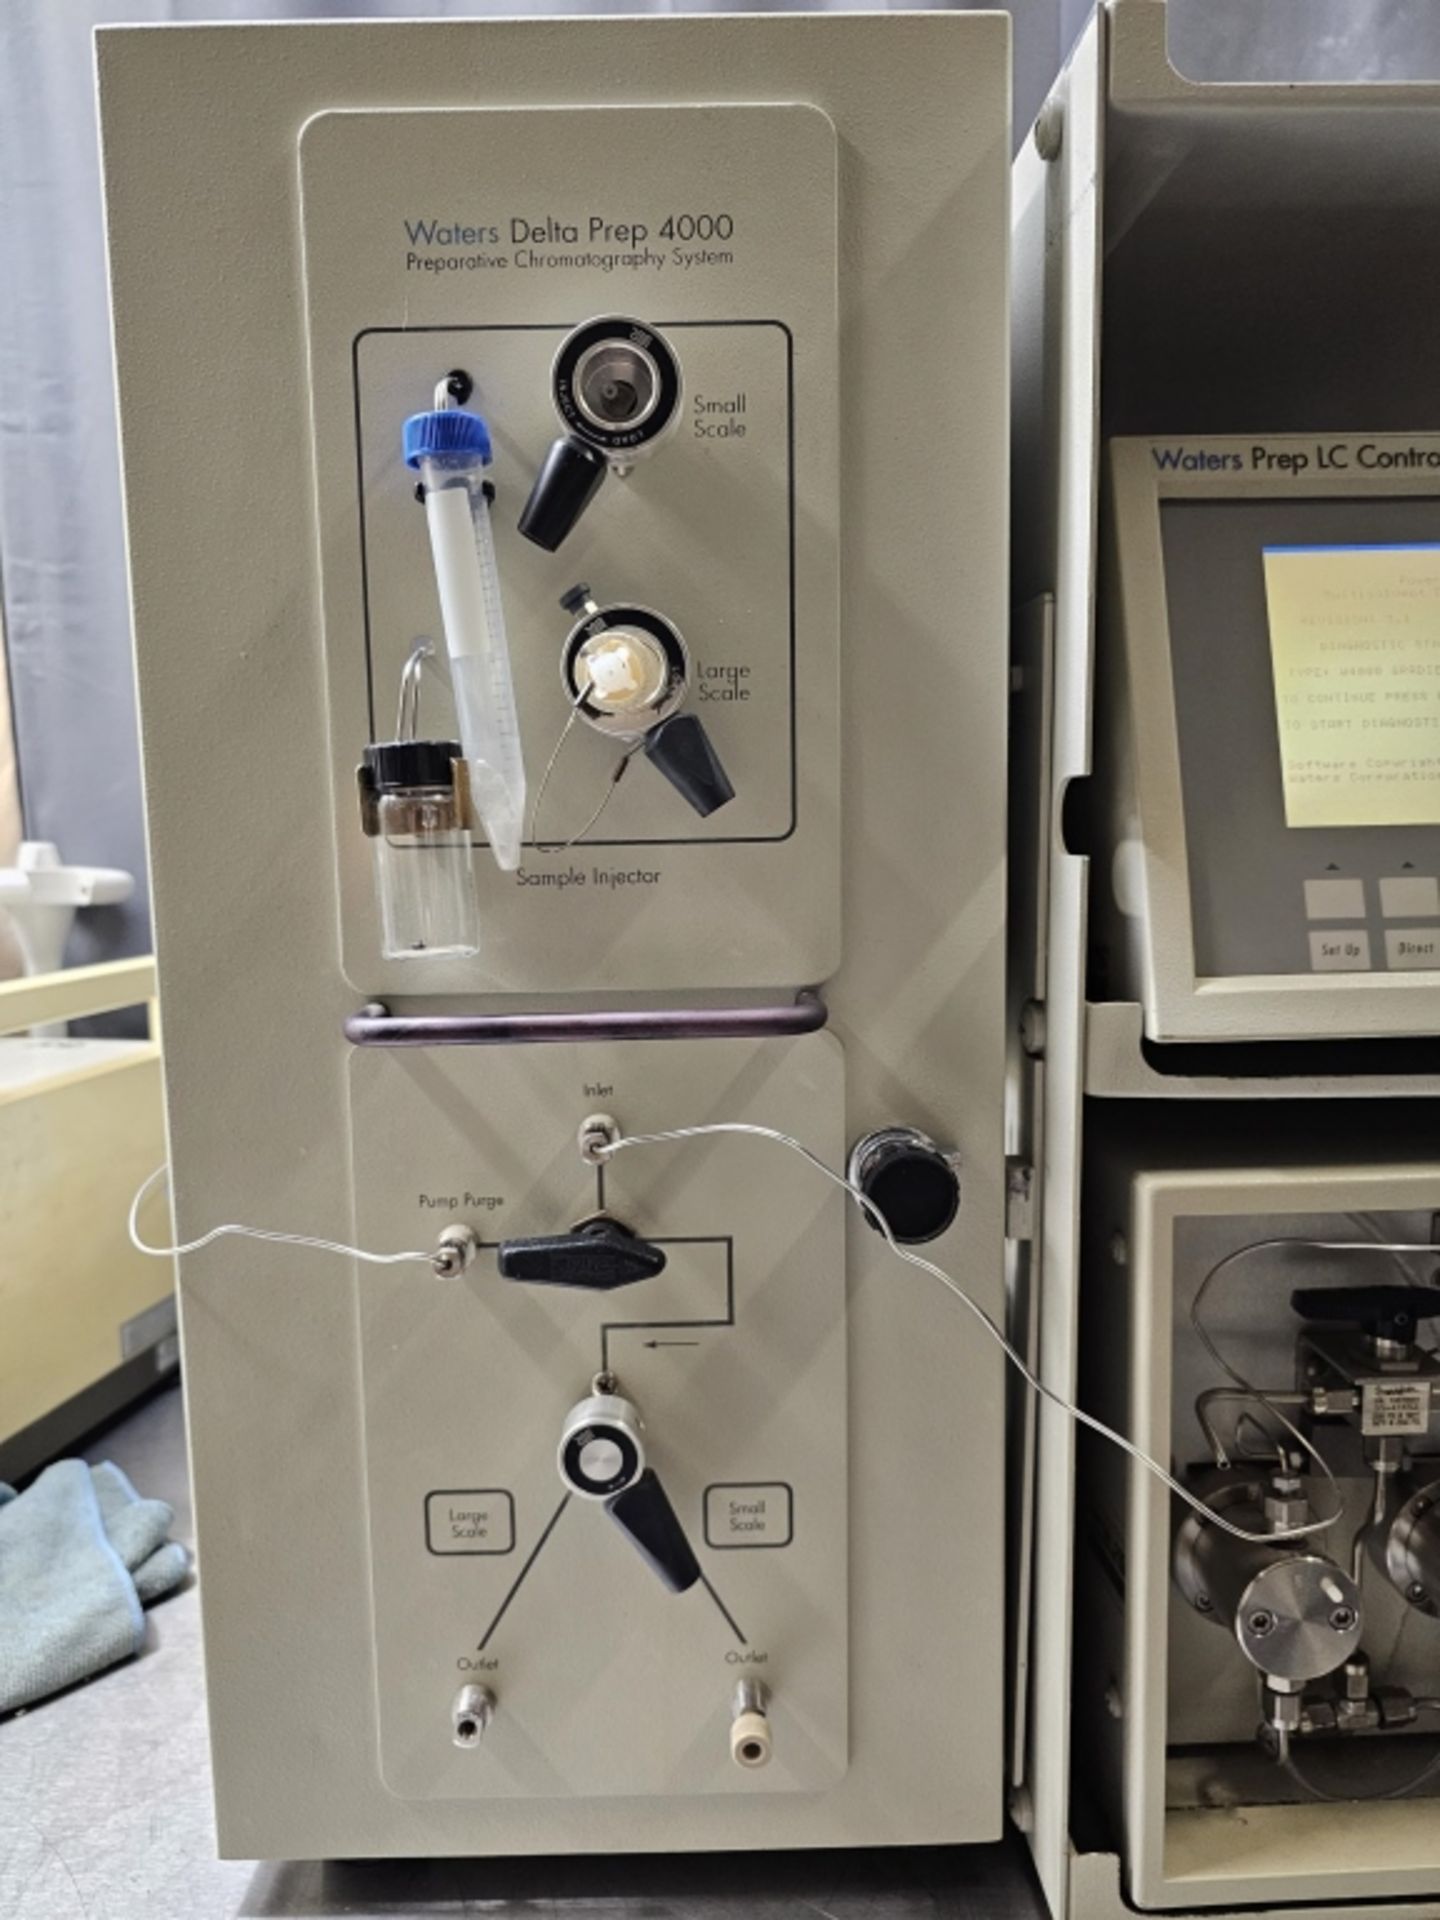 Waters Delta Prep 4000 Series Preparative Chromatography System With (1) Waters Prep LC Controller - Image 7 of 12